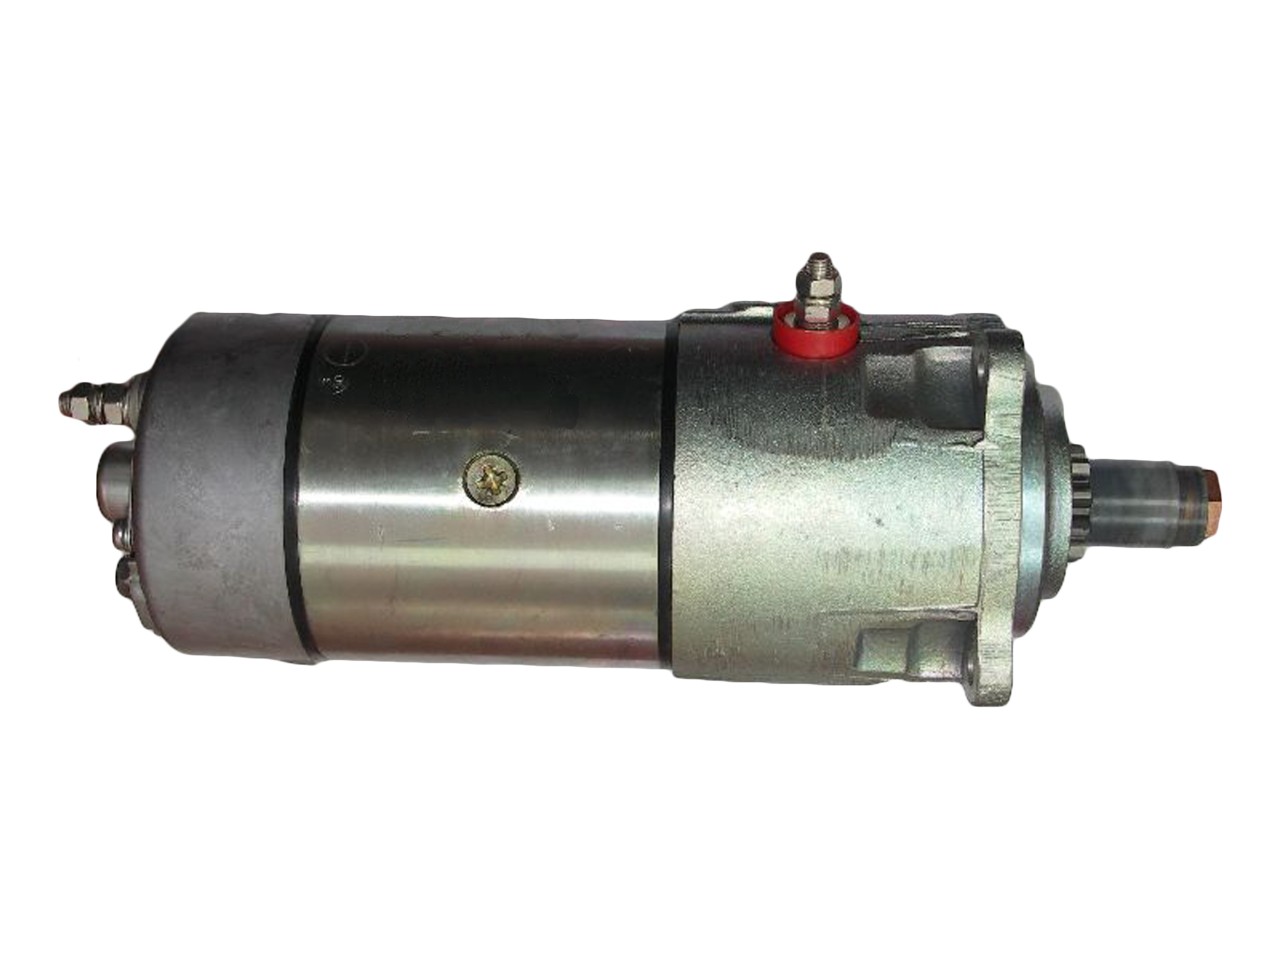 Rareelectrical NEW HI TORQUE STARTER MOTOR COMPATIBLE WITH PERKINS ENGINE 1006-6 5977CC 6 ACYL IN LINE 2873K056